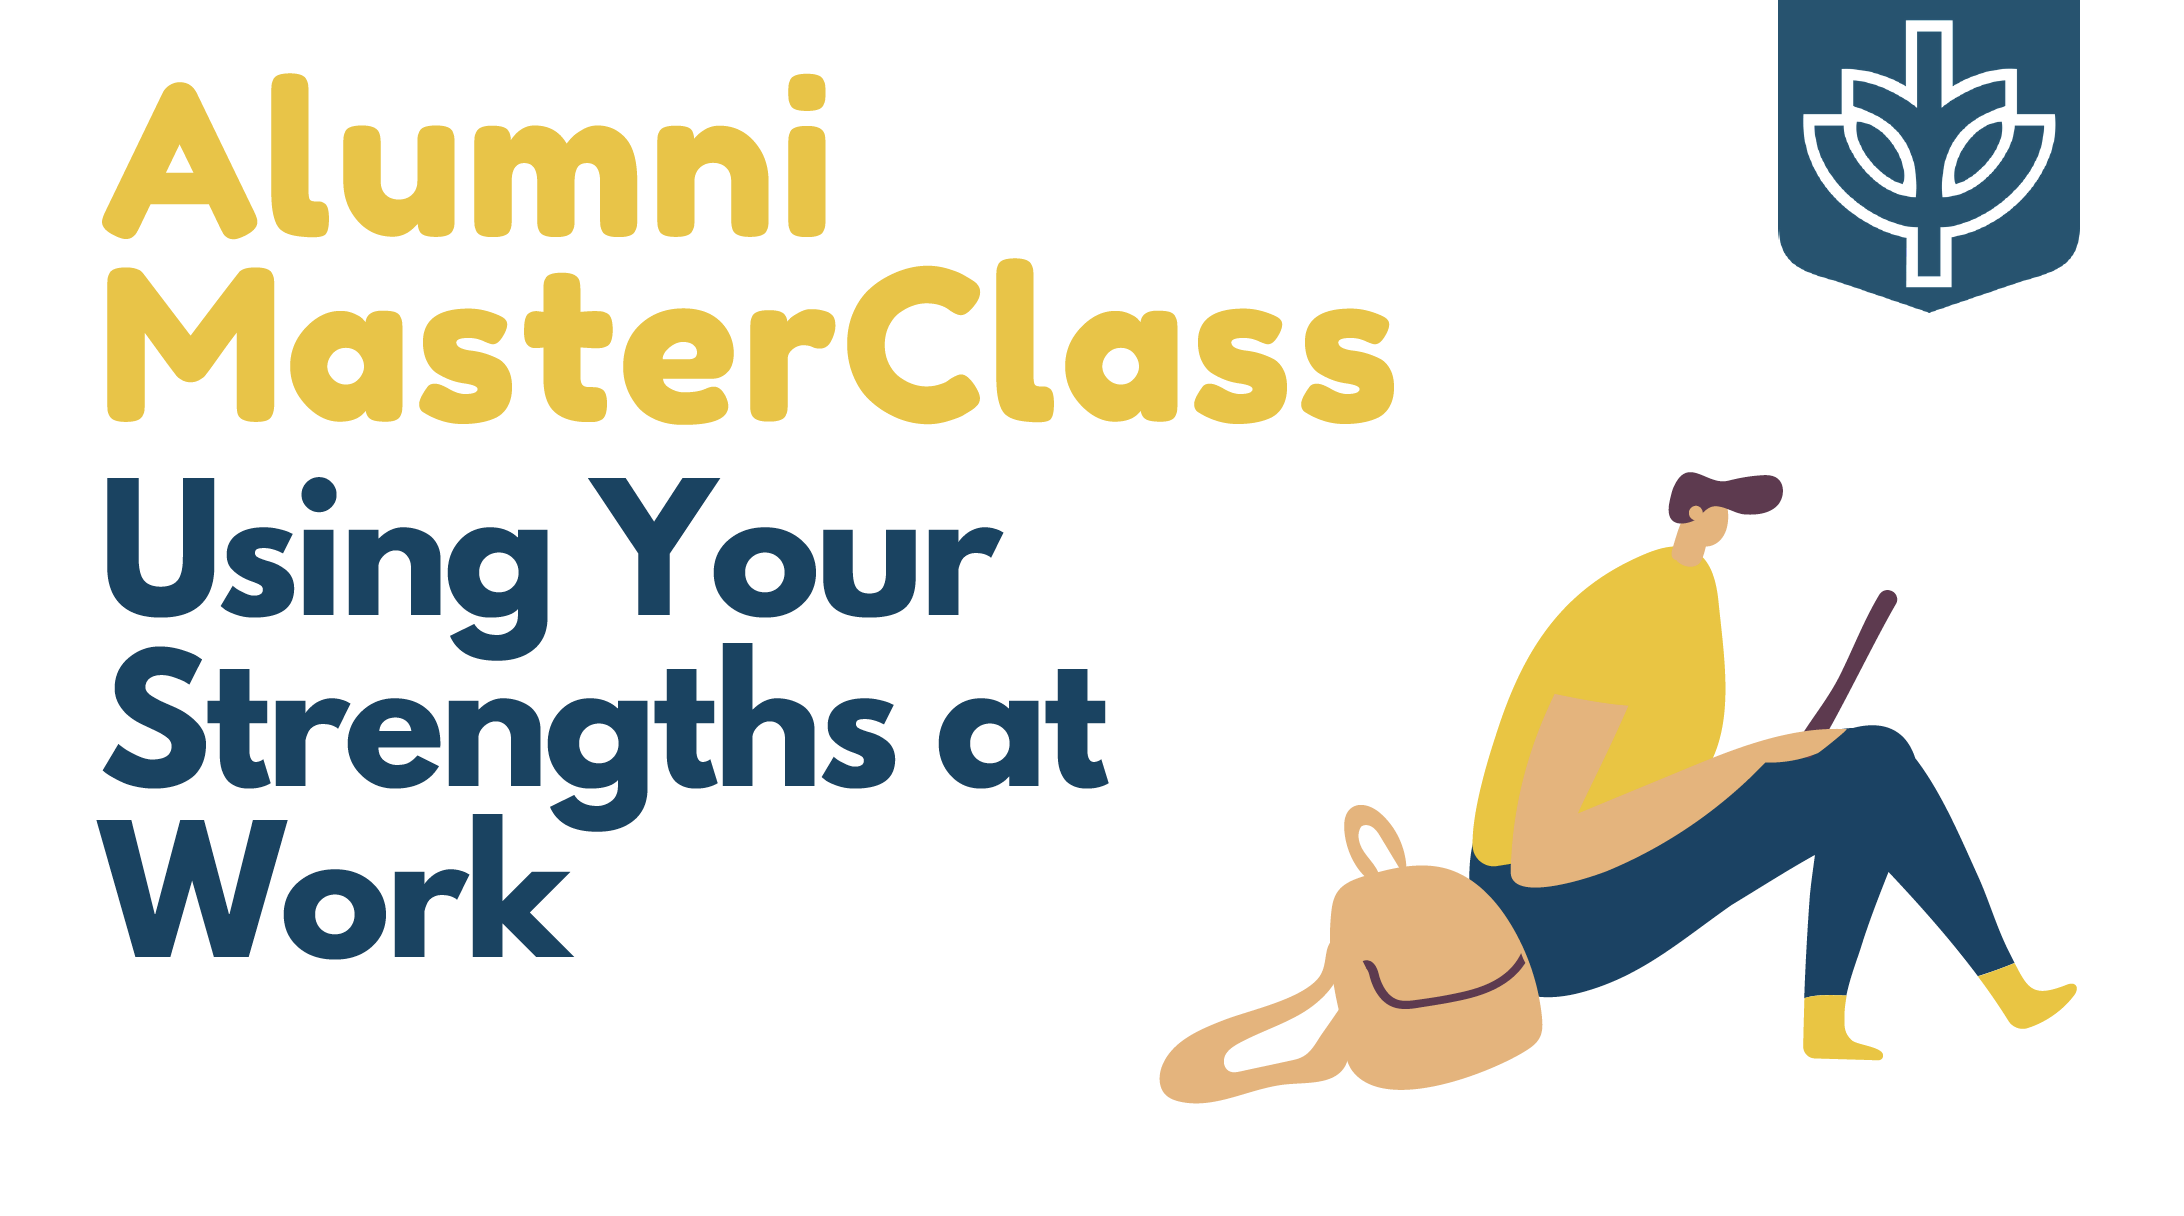 Alumni MasterClass: Using Your Strengths at Work